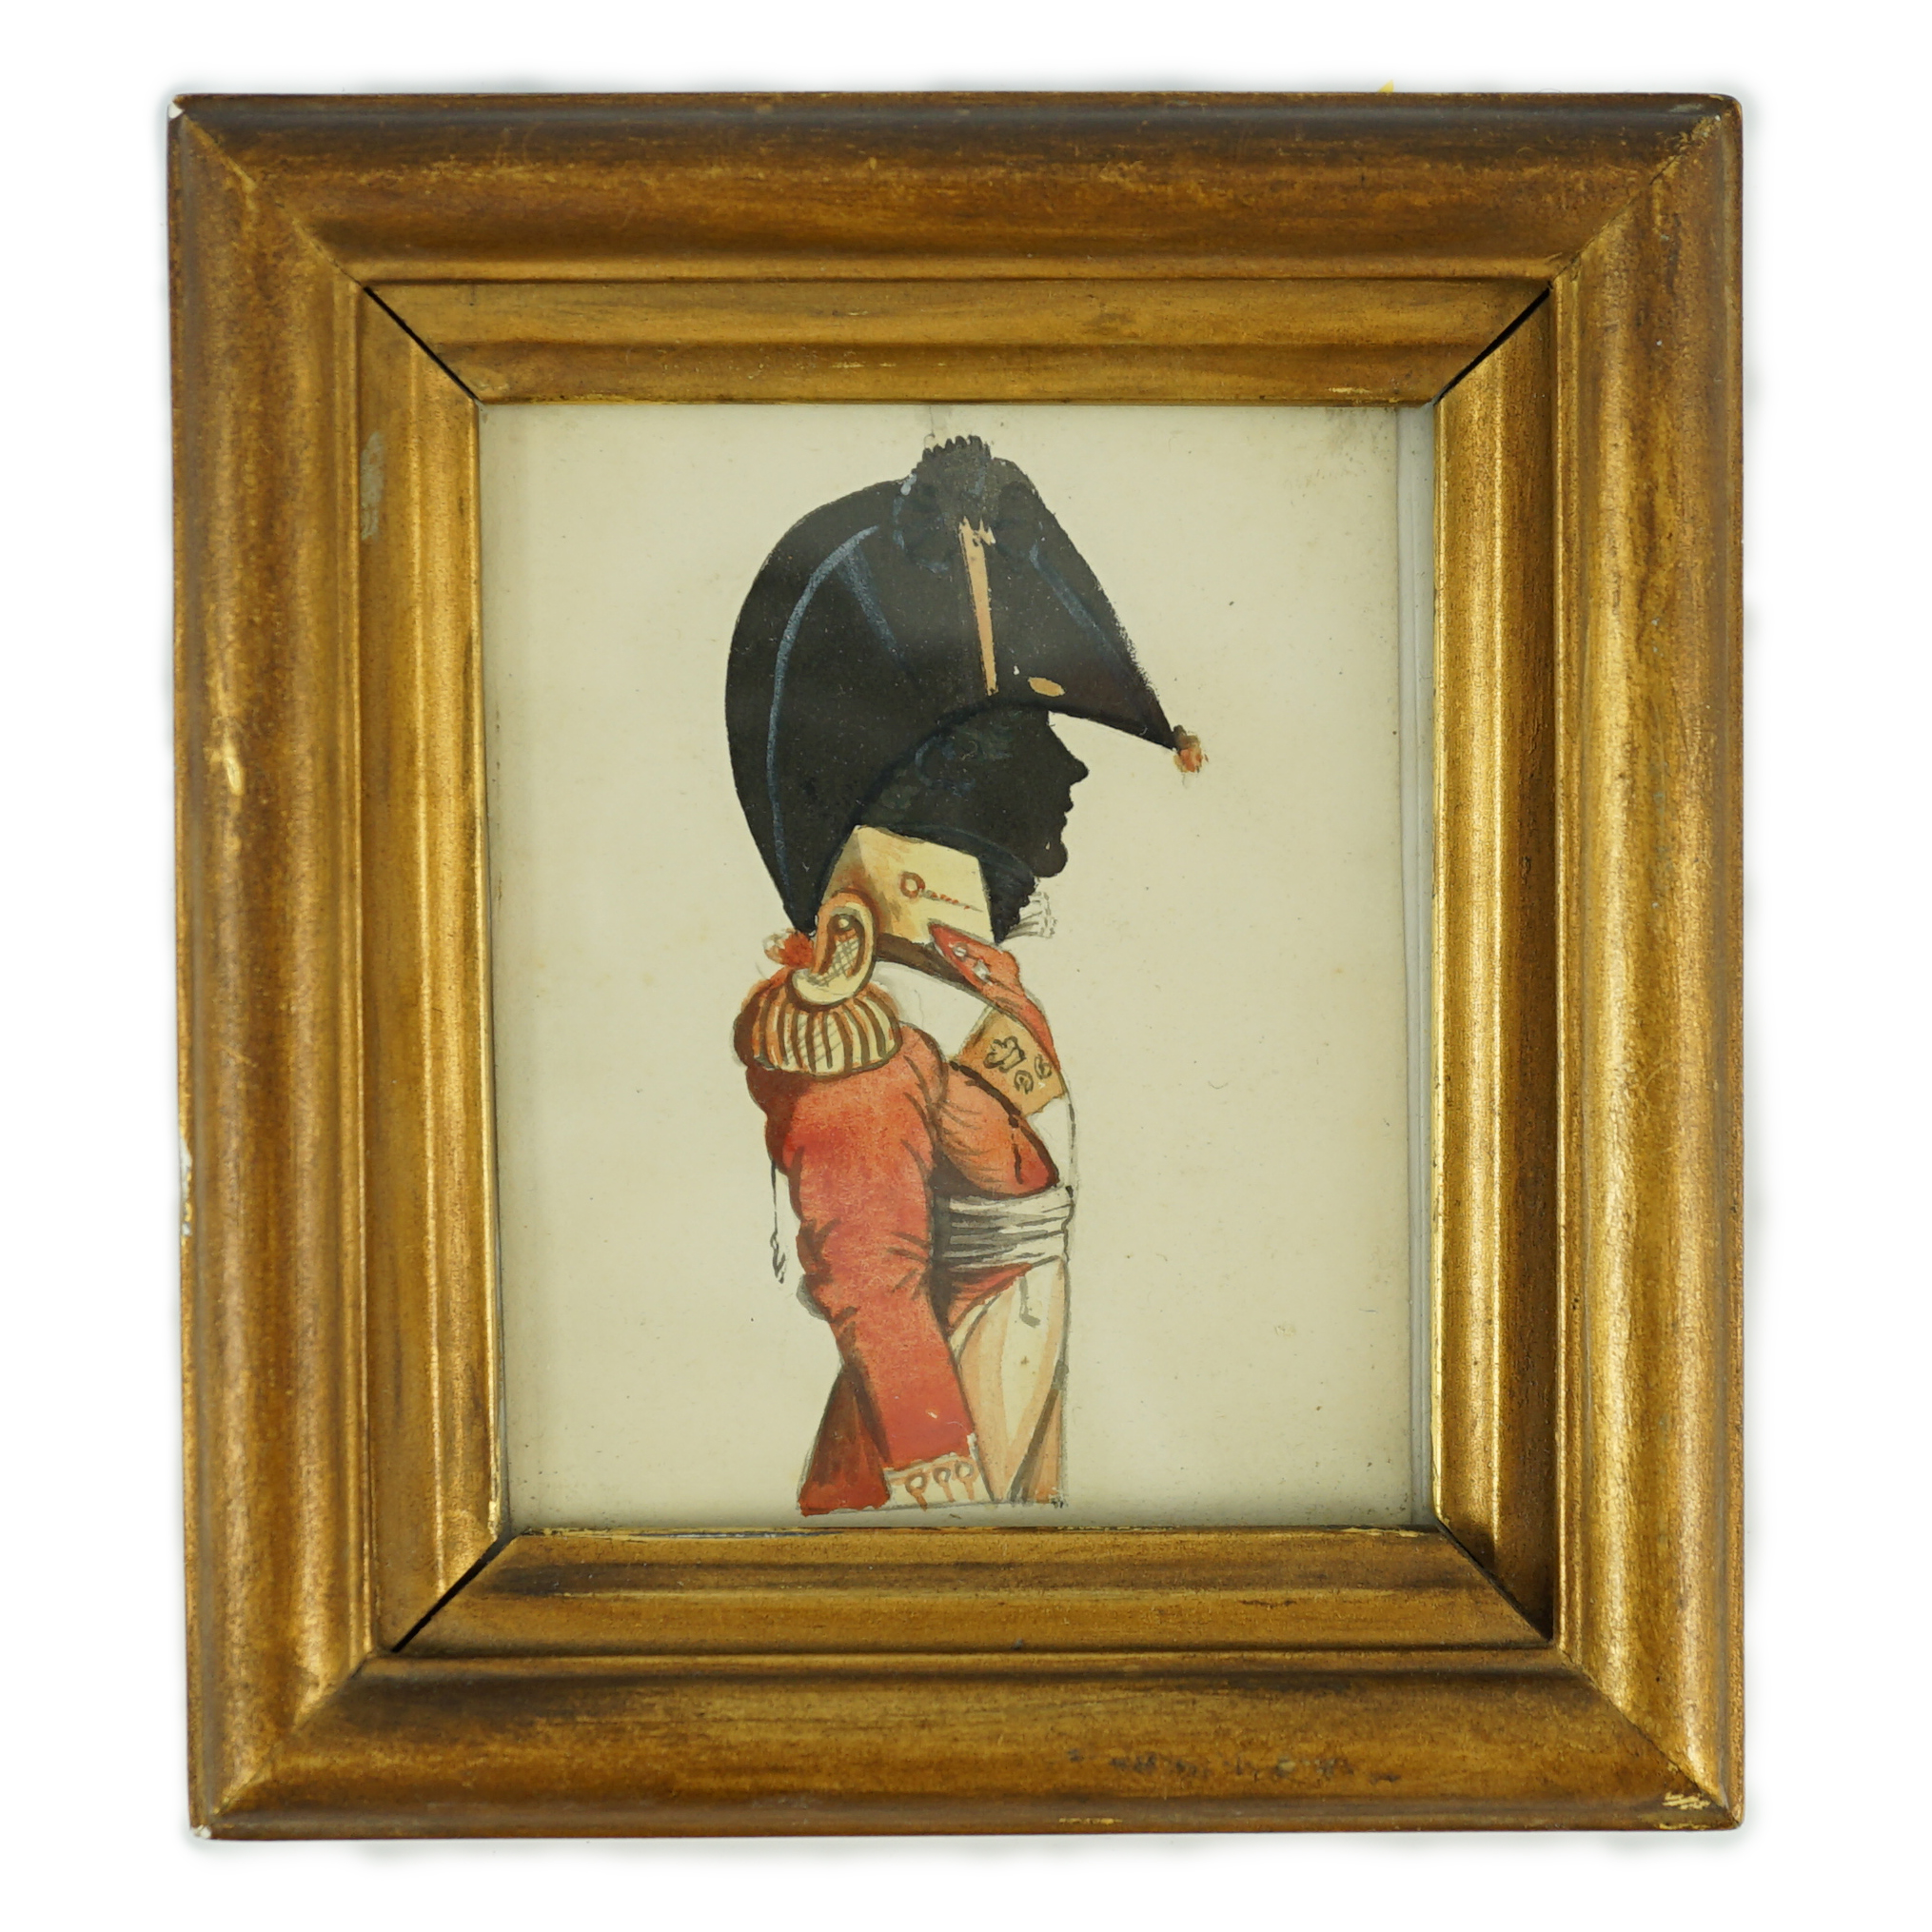 After John Smart (1742-1811), Silhouette of an army officer, watercolour and ink on card, 9 x 7.25cm.